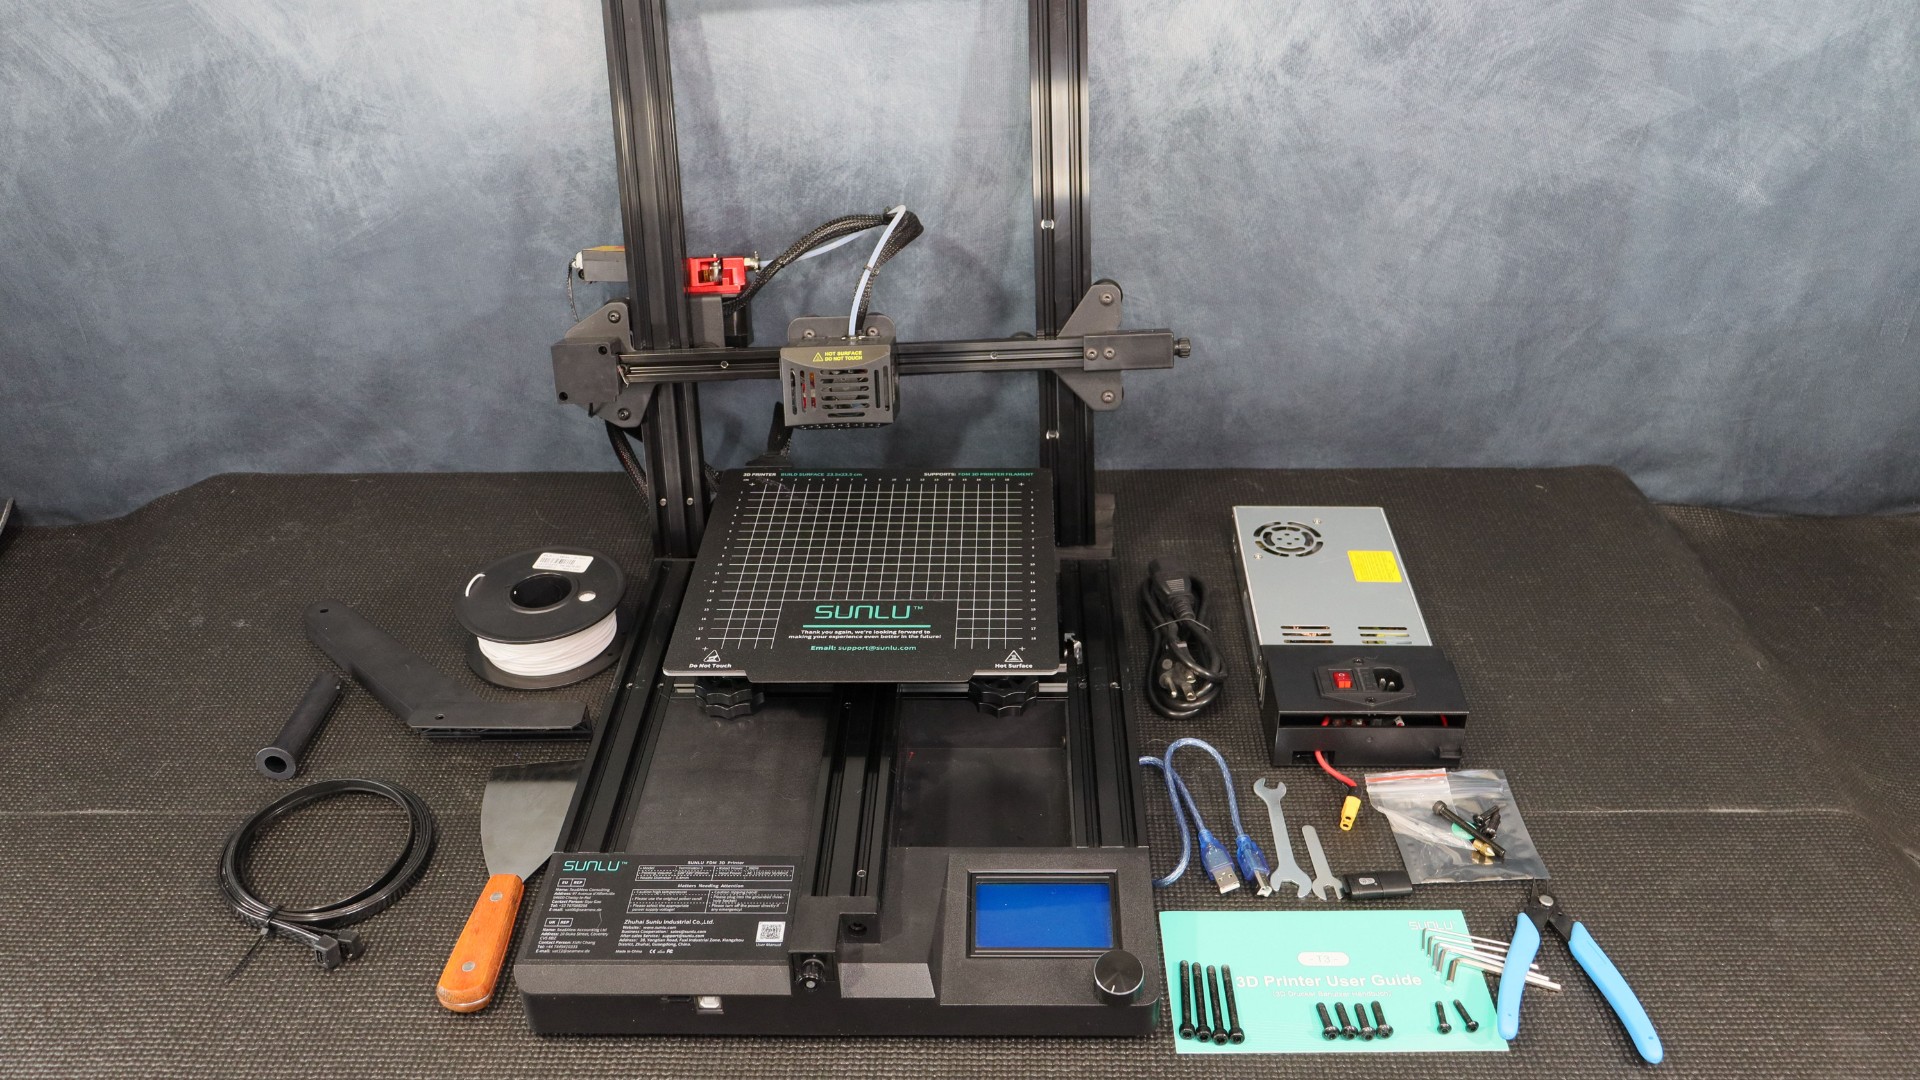 Sunlu Terminator 3 (T3) 3D printer alongside the included tools and accessories.